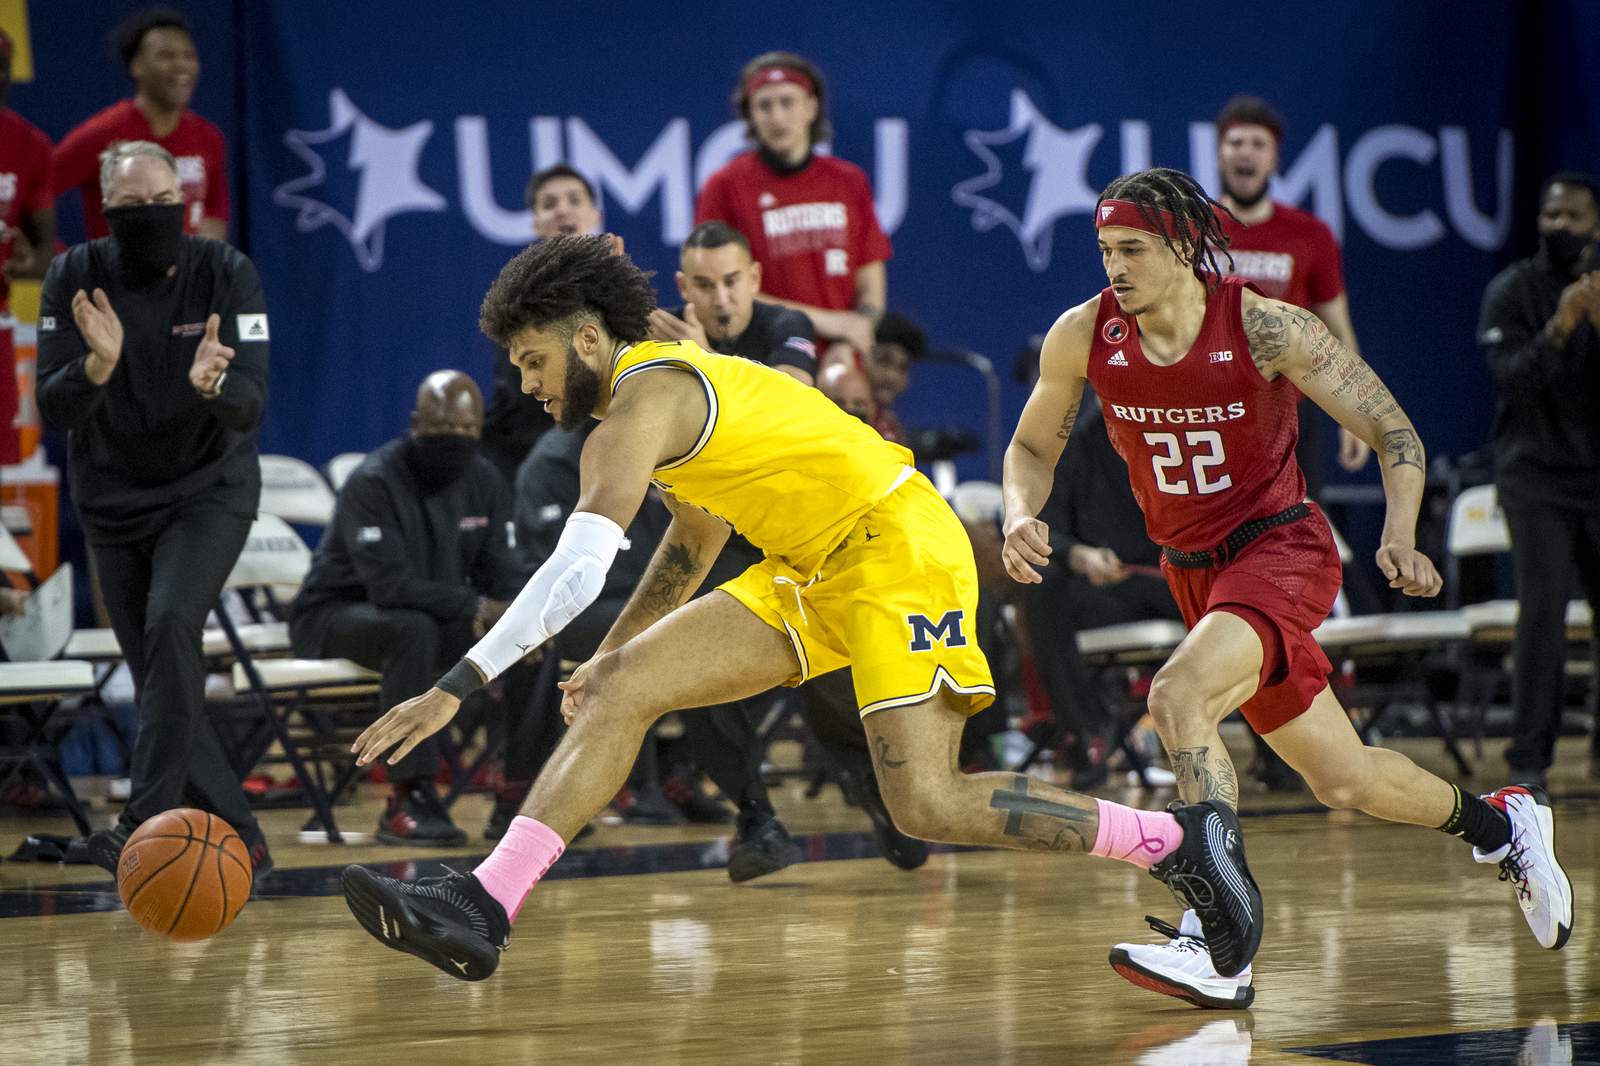 If Michigan basketball wants Big Ten title, it has to beat the best over next 2 weeks